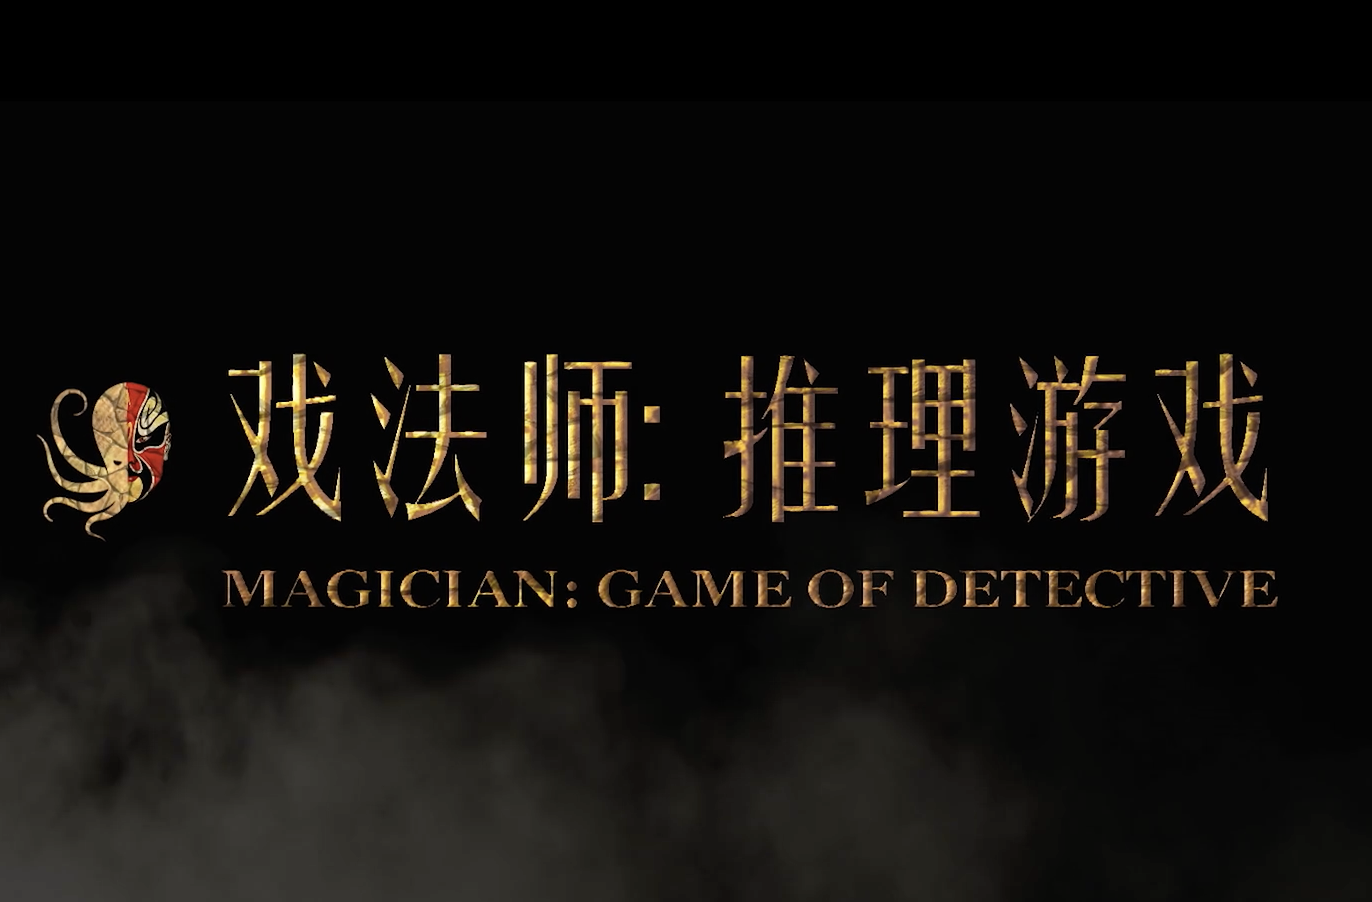 Magician: Game of Detective